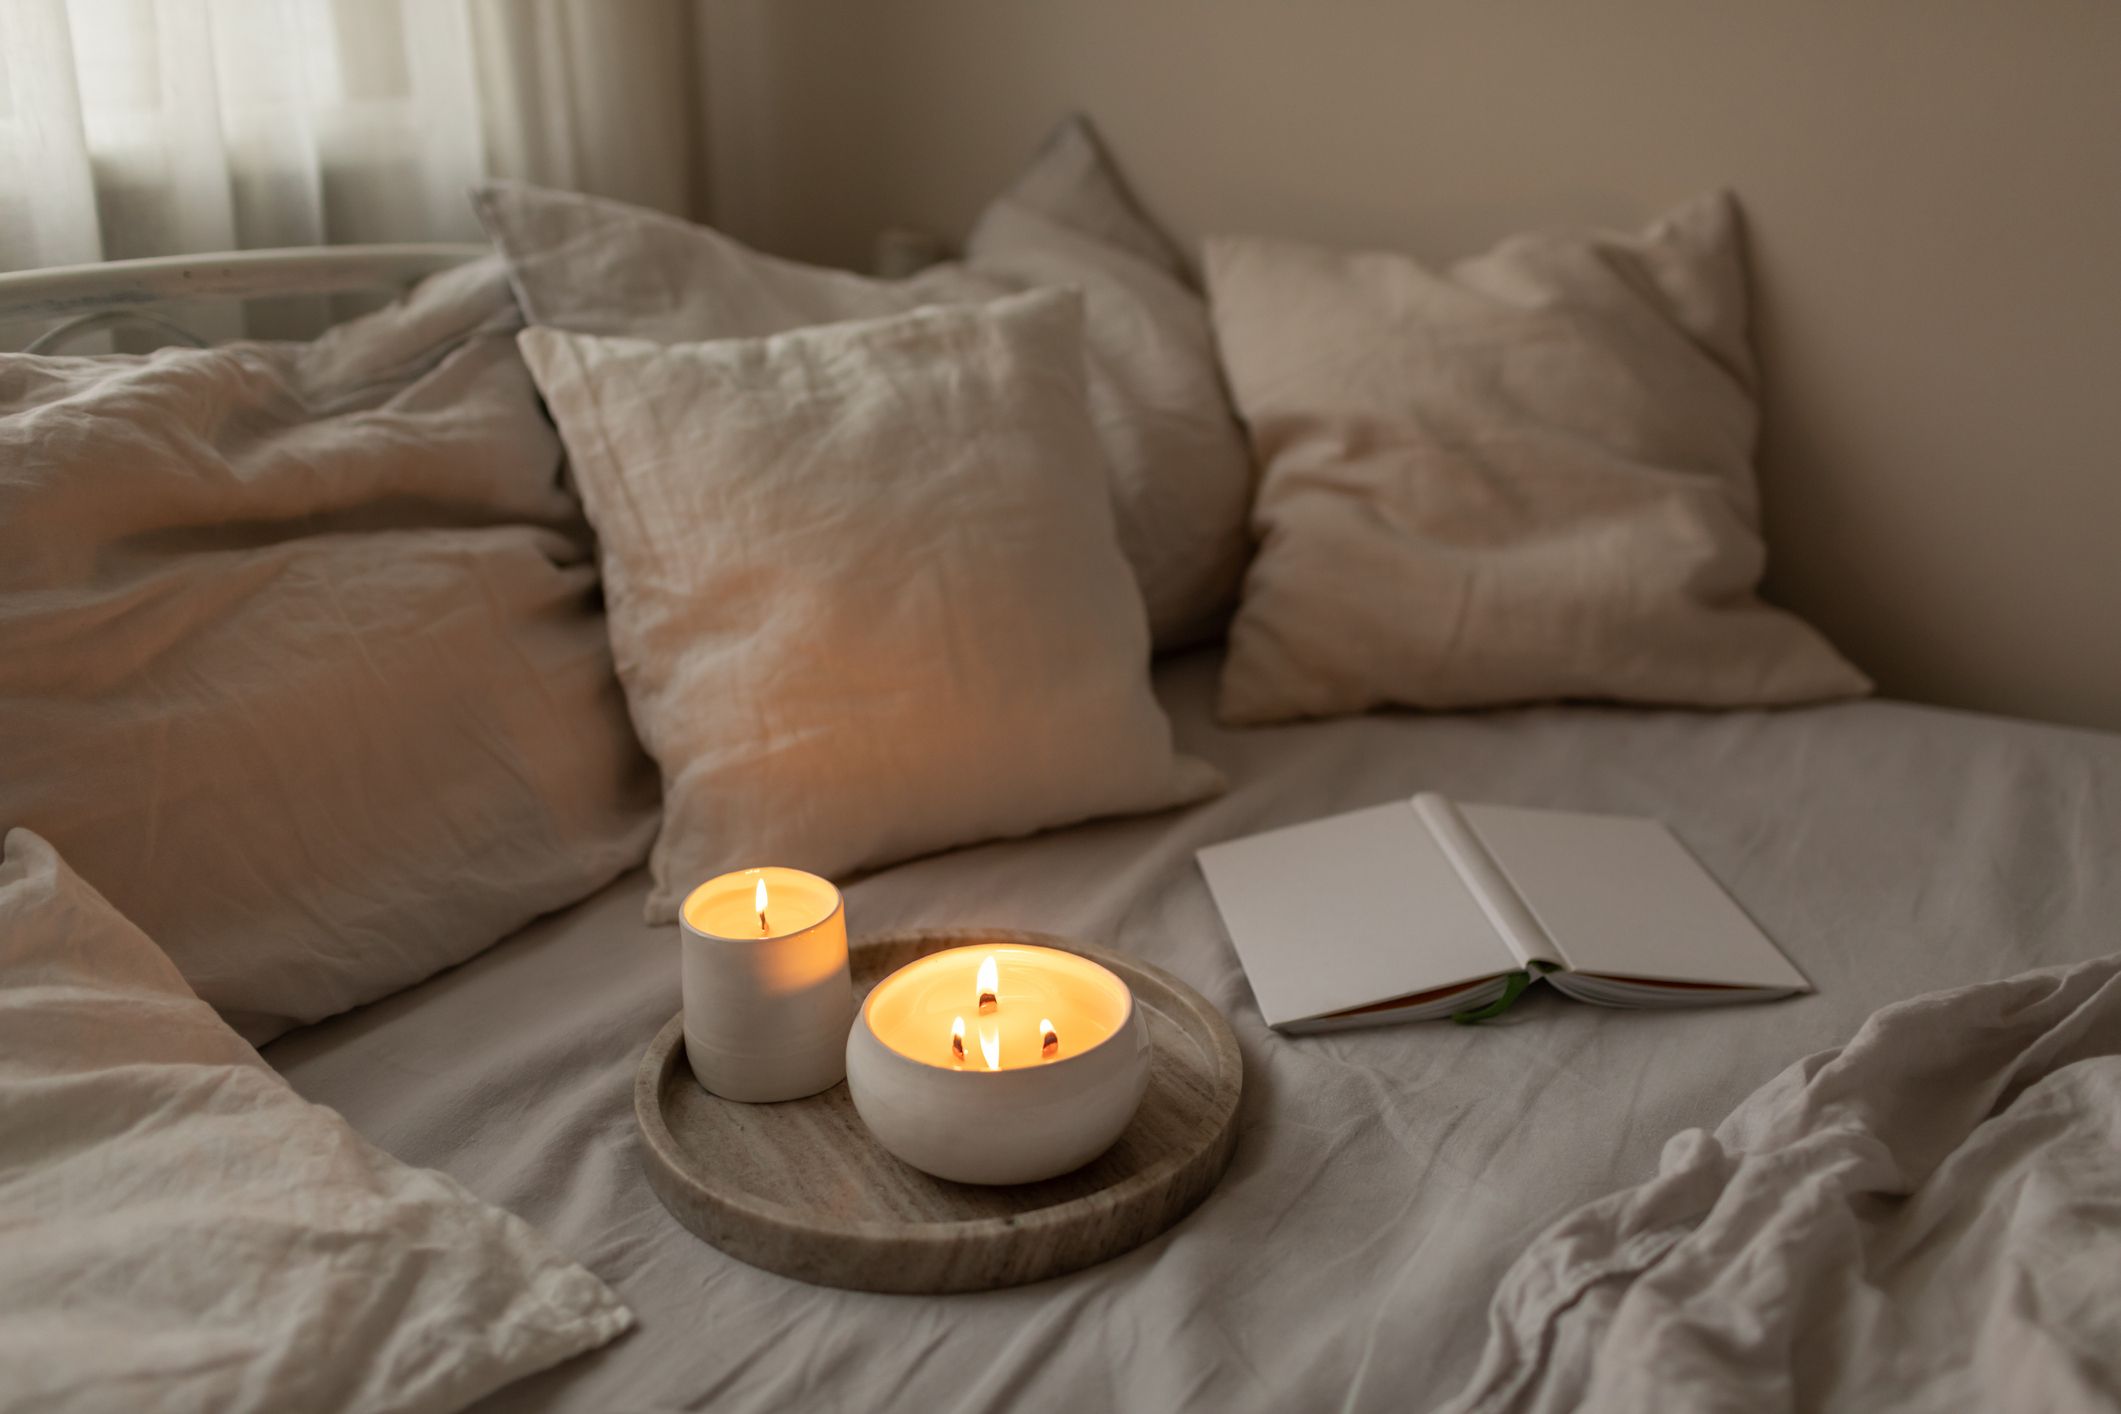 12 Items an Energy Healer Says Should Be in Your Bedroom